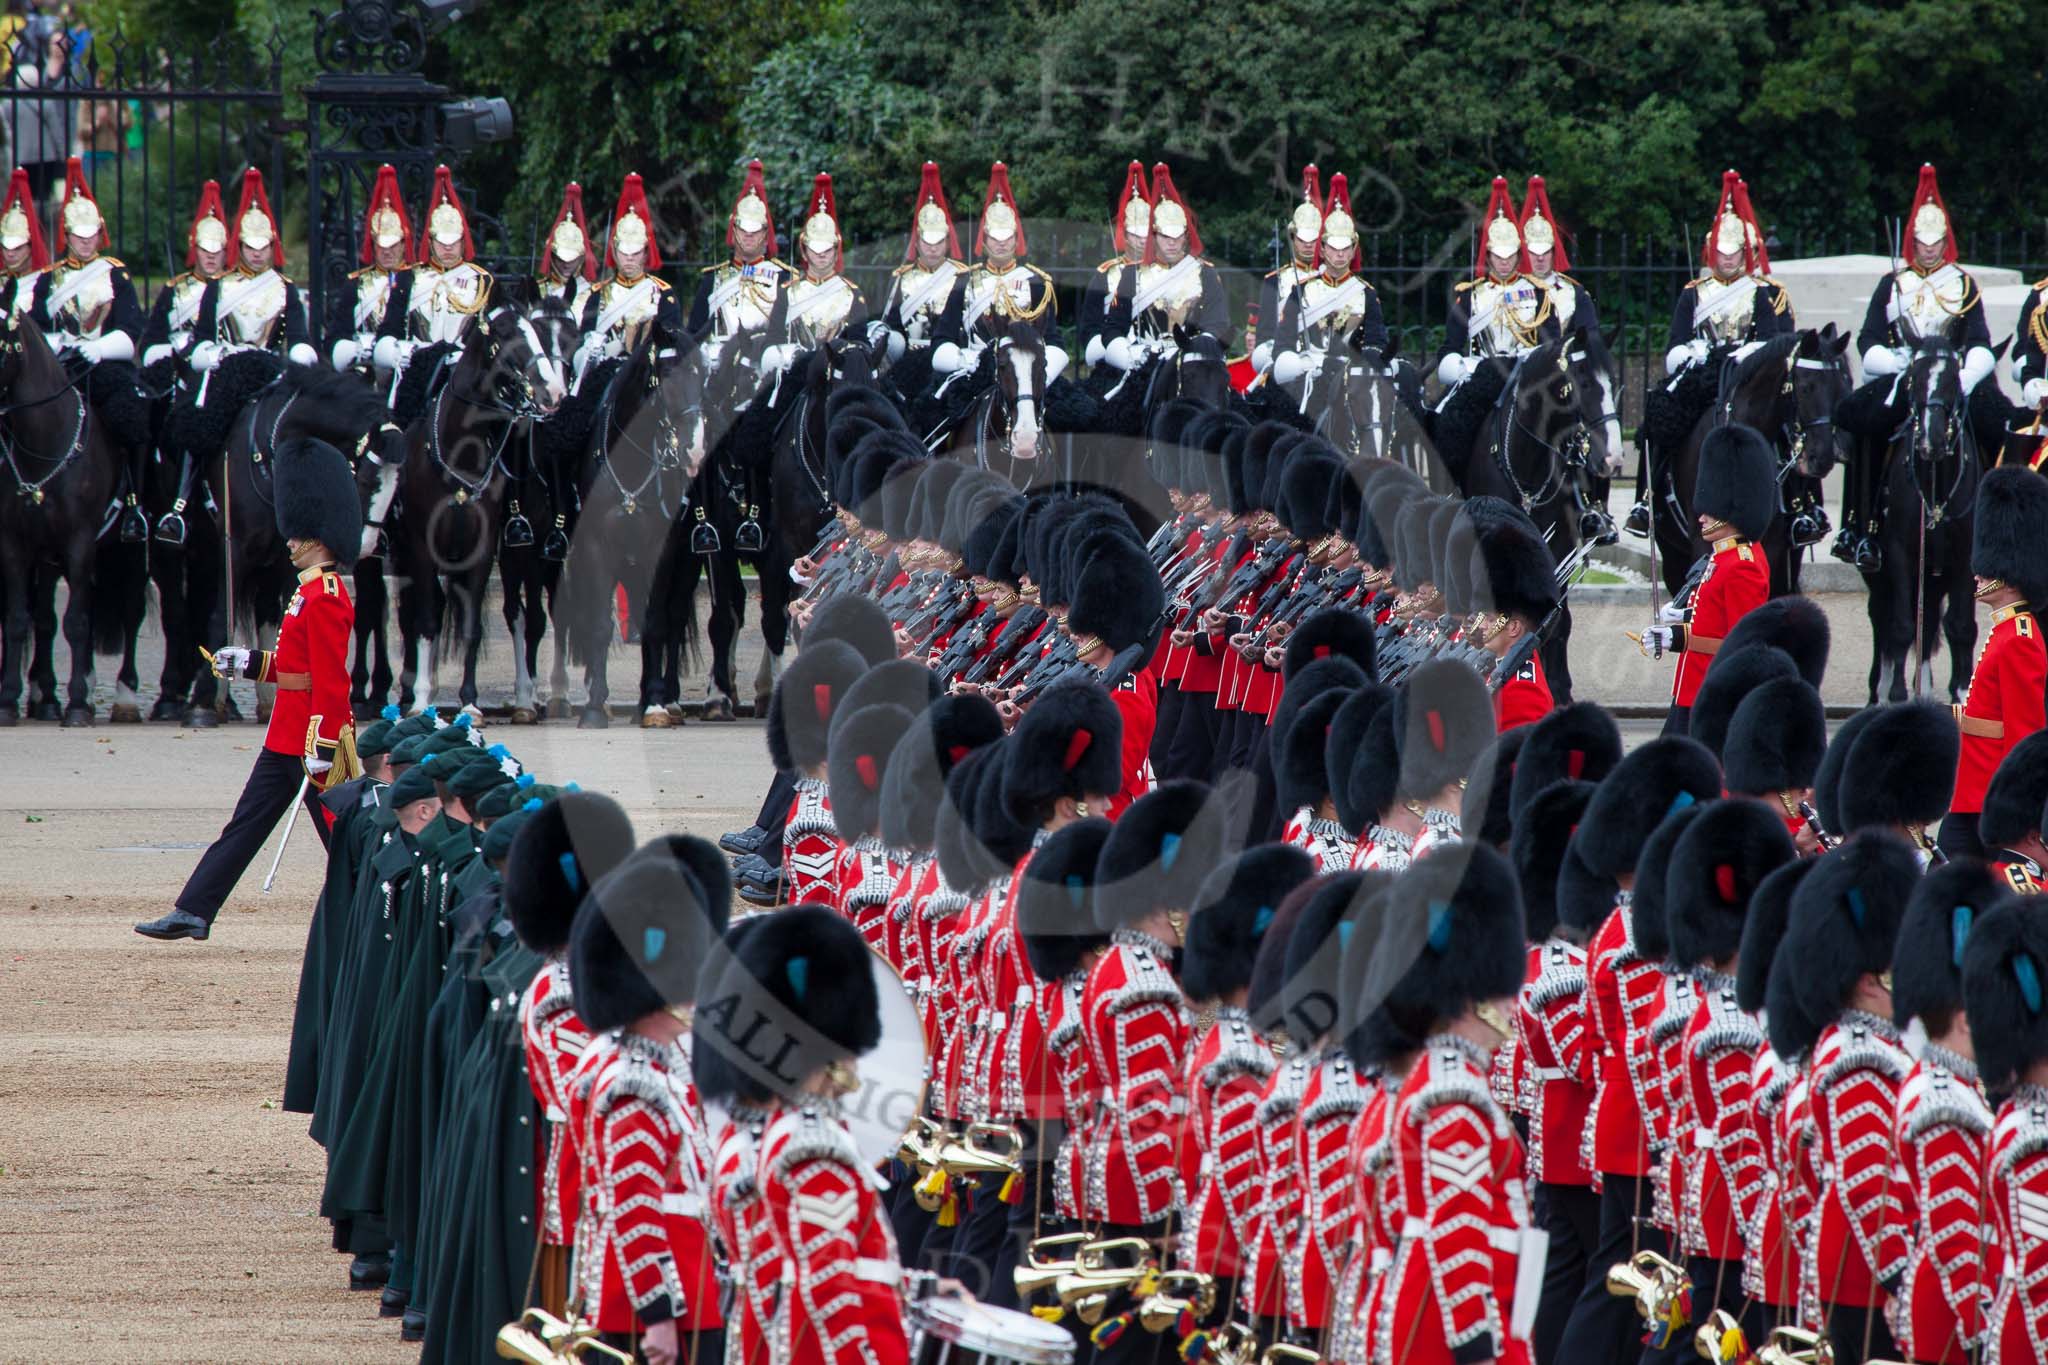 Trooping the Colour 2012: The Massed bands during the March Past. No. 5 Guard, 1st Battalion Irish Guards, marching to the left, with Irish Guards musicians (here the drummers and pipers) marching, as part os the Massed Bands, to the right..
Horse Guards Parade, Westminster,
London SW1,

United Kingdom,
on 16 June 2012 at 11:33, image #385